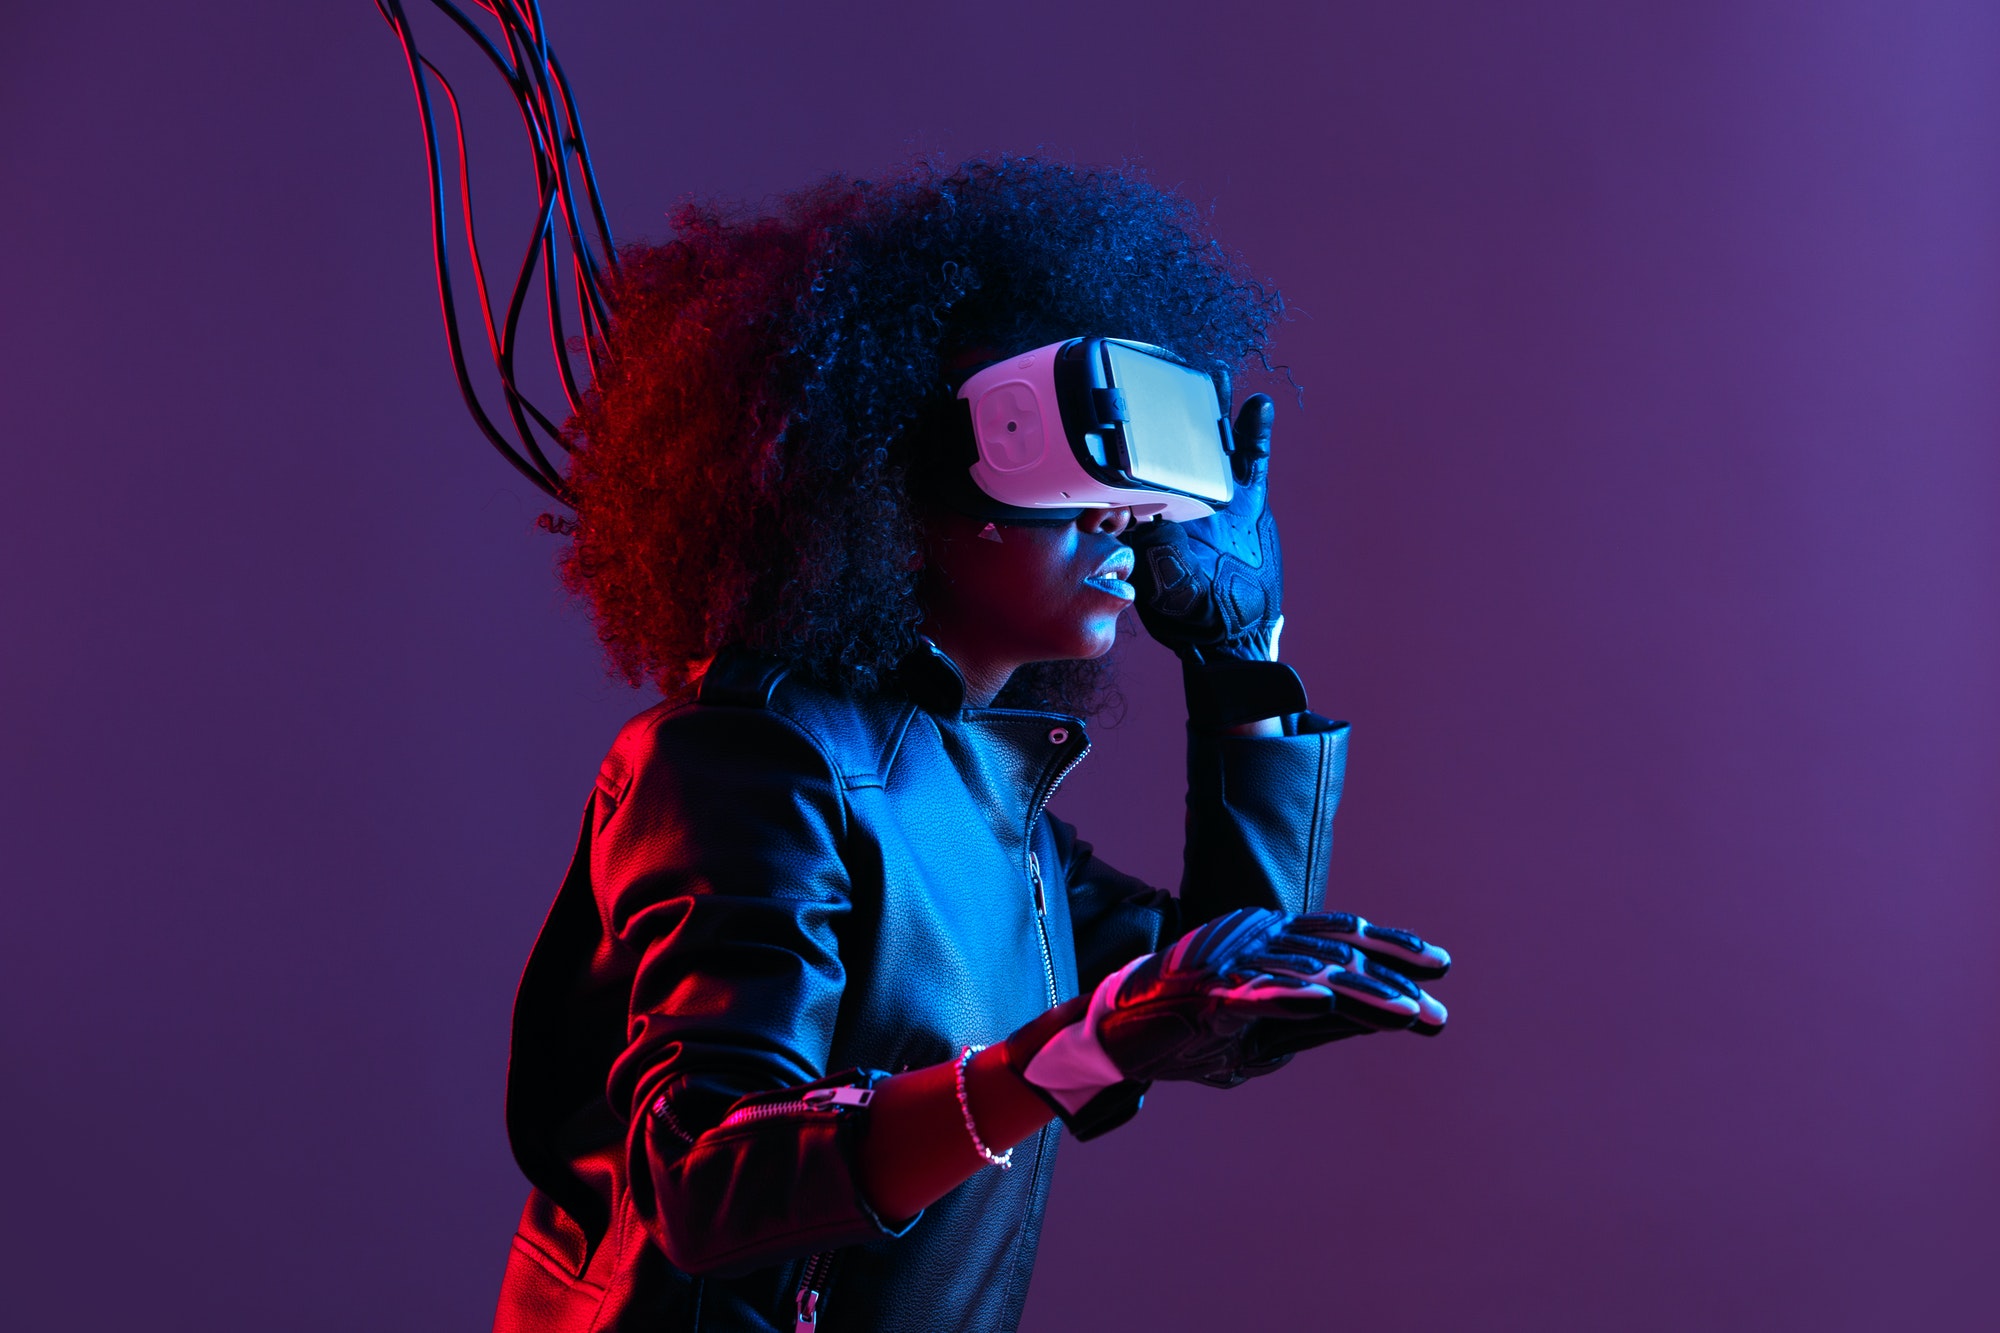 mod-curly-dark-haired-girl-dressed-in-black-leather-jacket-and-gloves-uses-the-virtual-reality.jpg